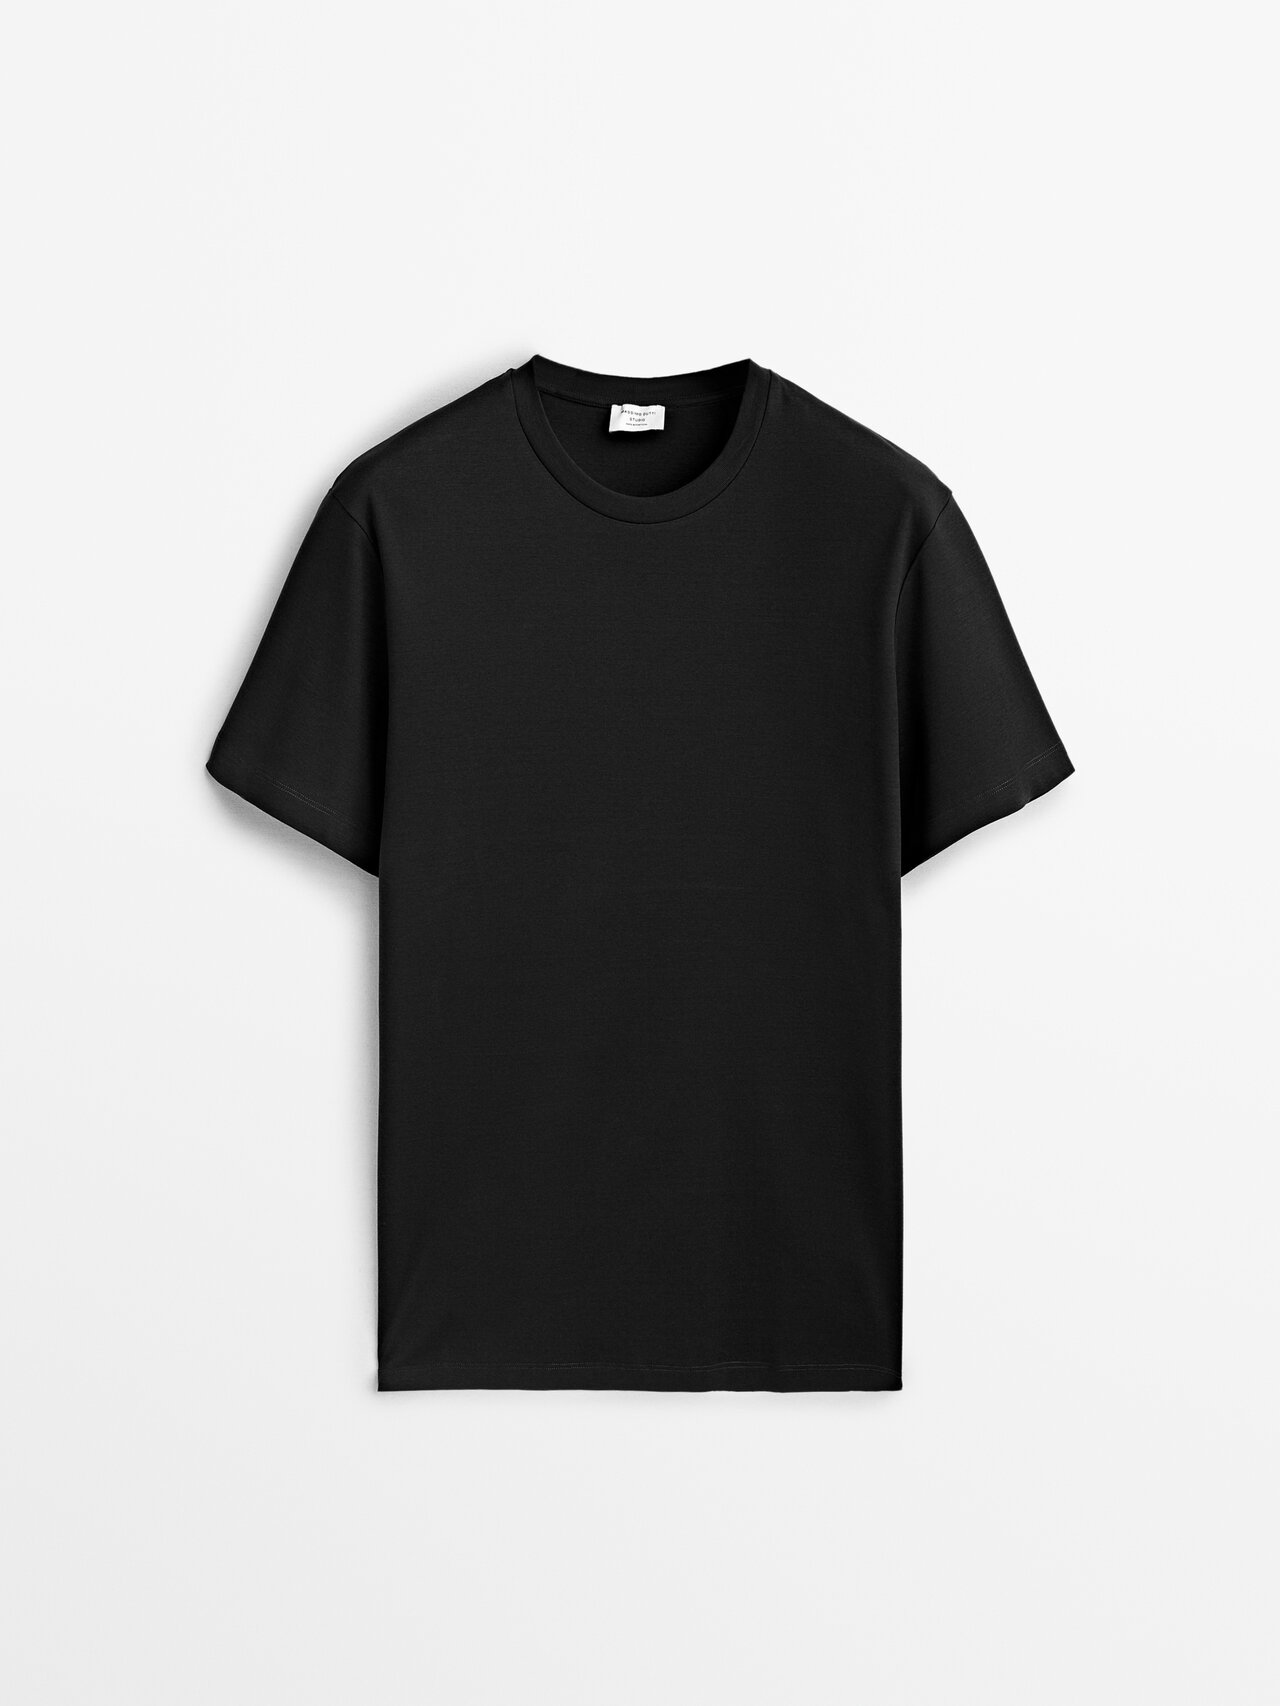 Massimo Dutti Relaxed Fit Short Sleeve Cotton T-shirt - Studio In Schwarz